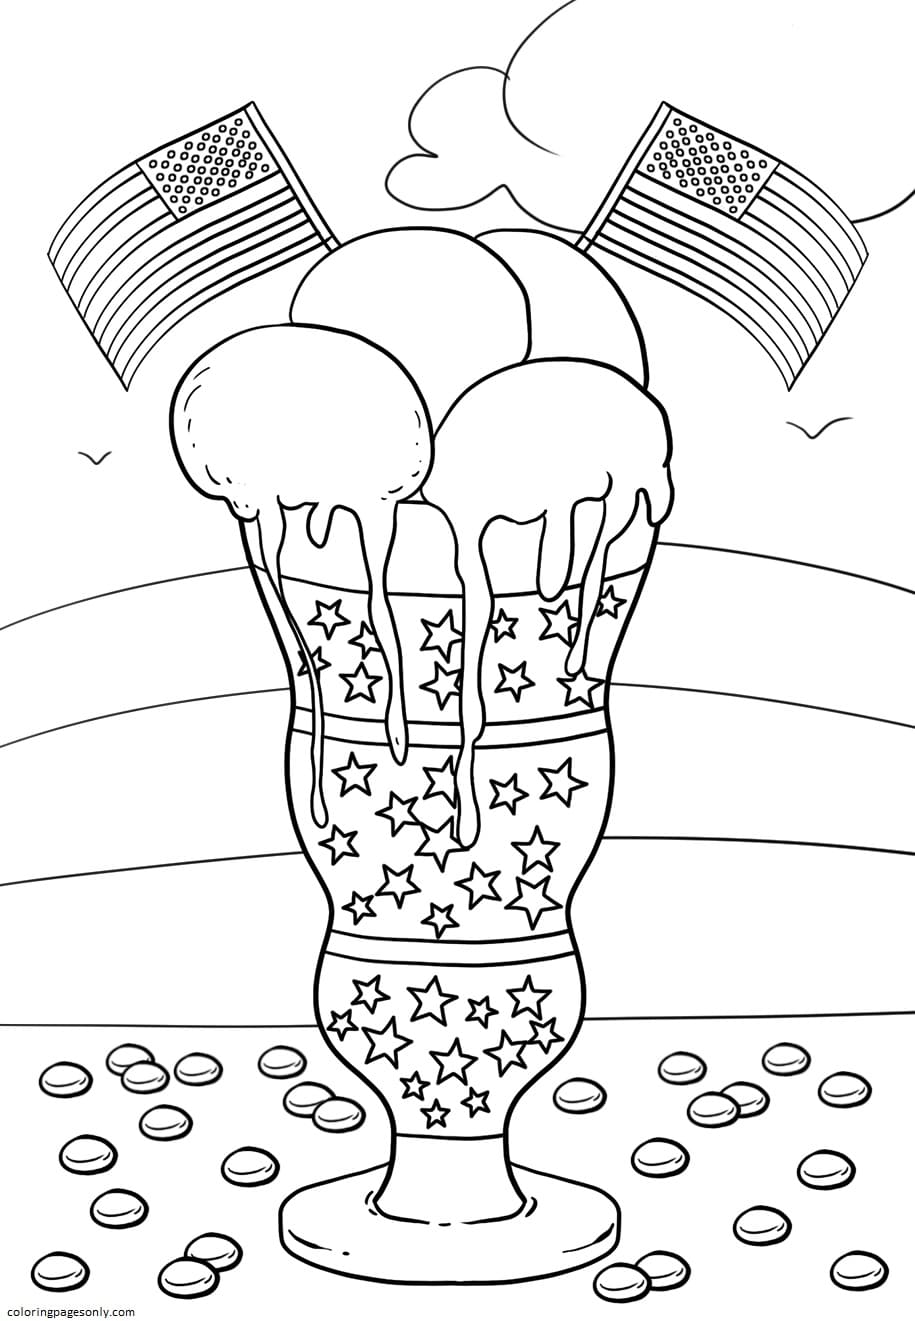 The Happy 4th of July Coloring Pages - Independence Day 4th Of July